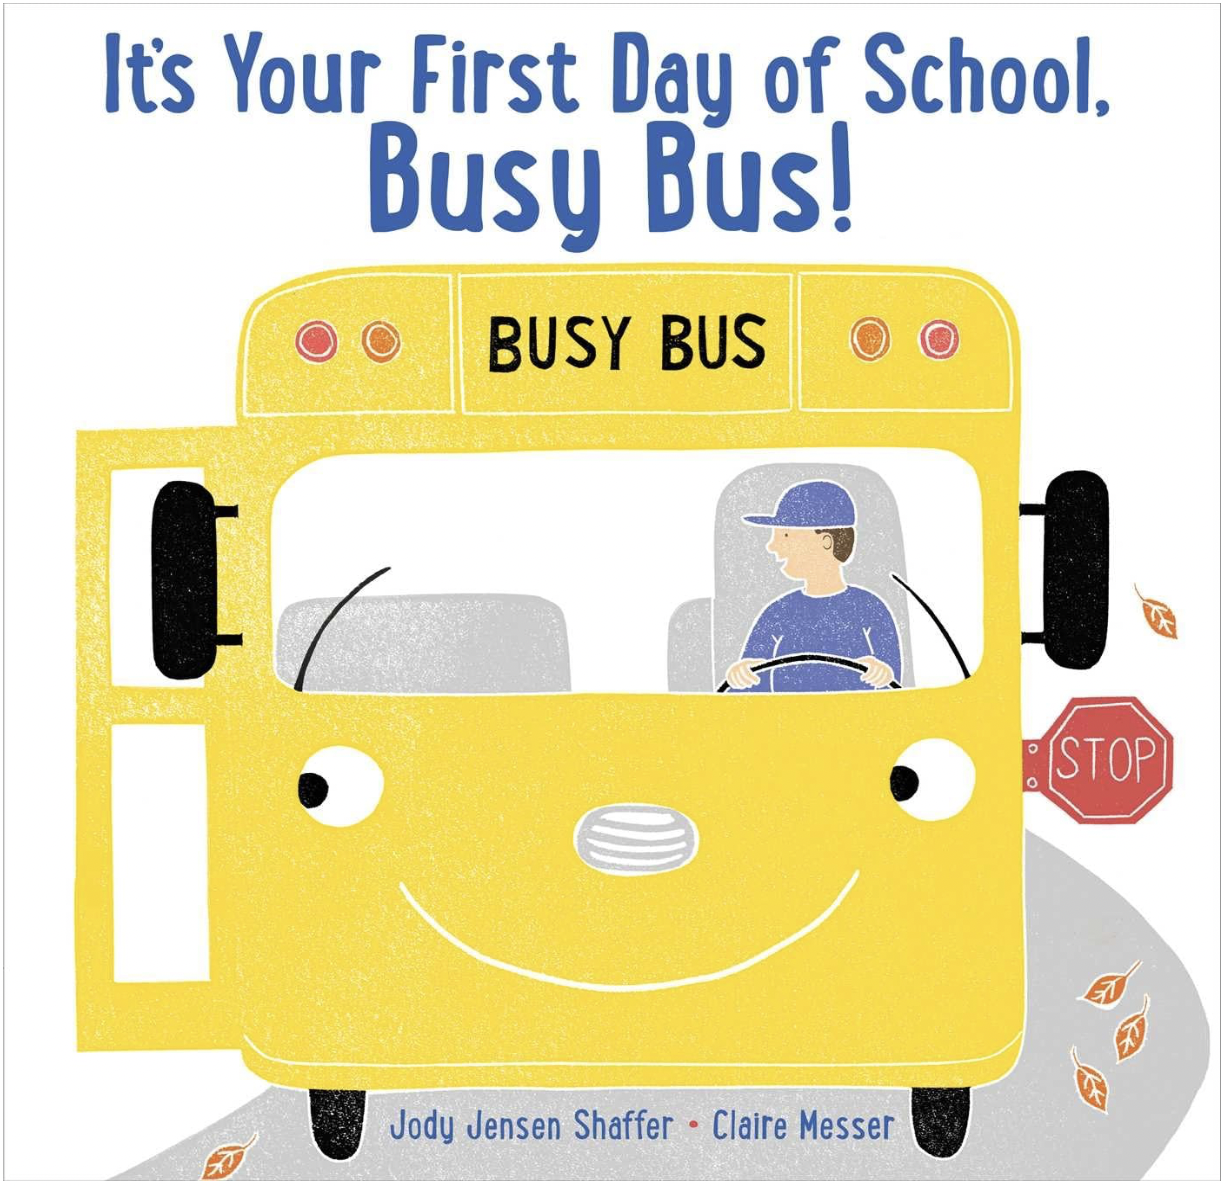 It's your first day of school Busy Bus!